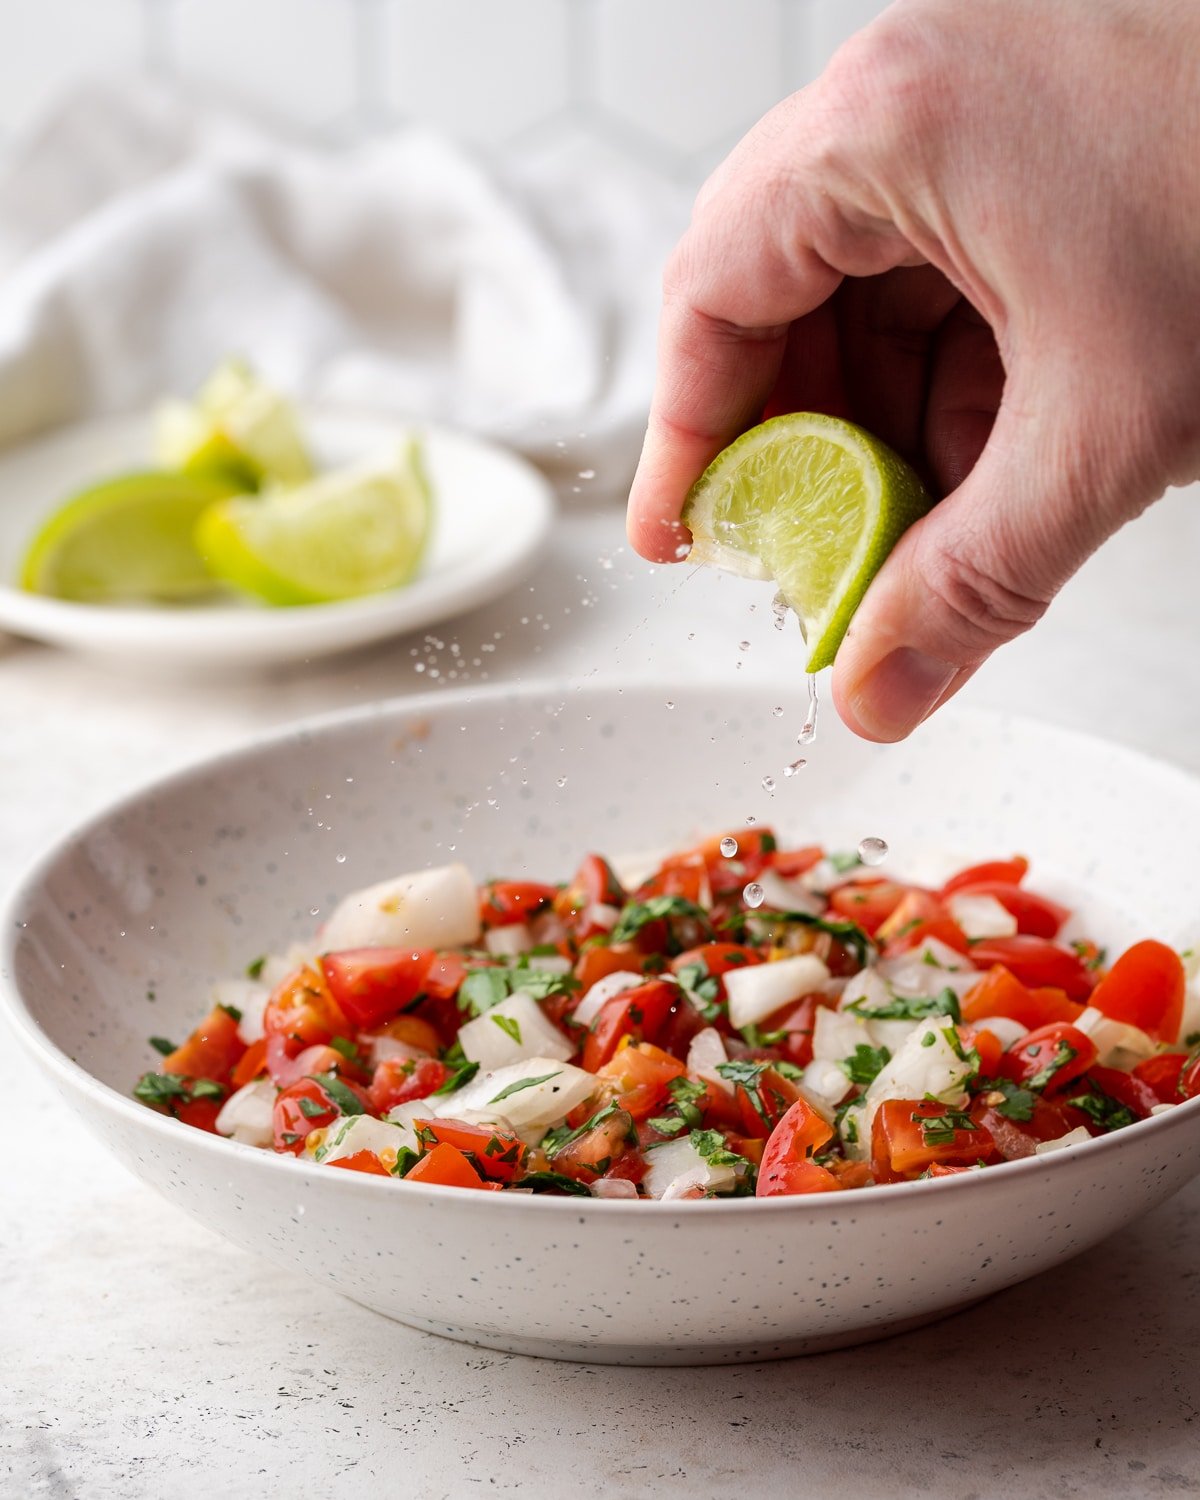 lime juice being squeezed on pico de gallo